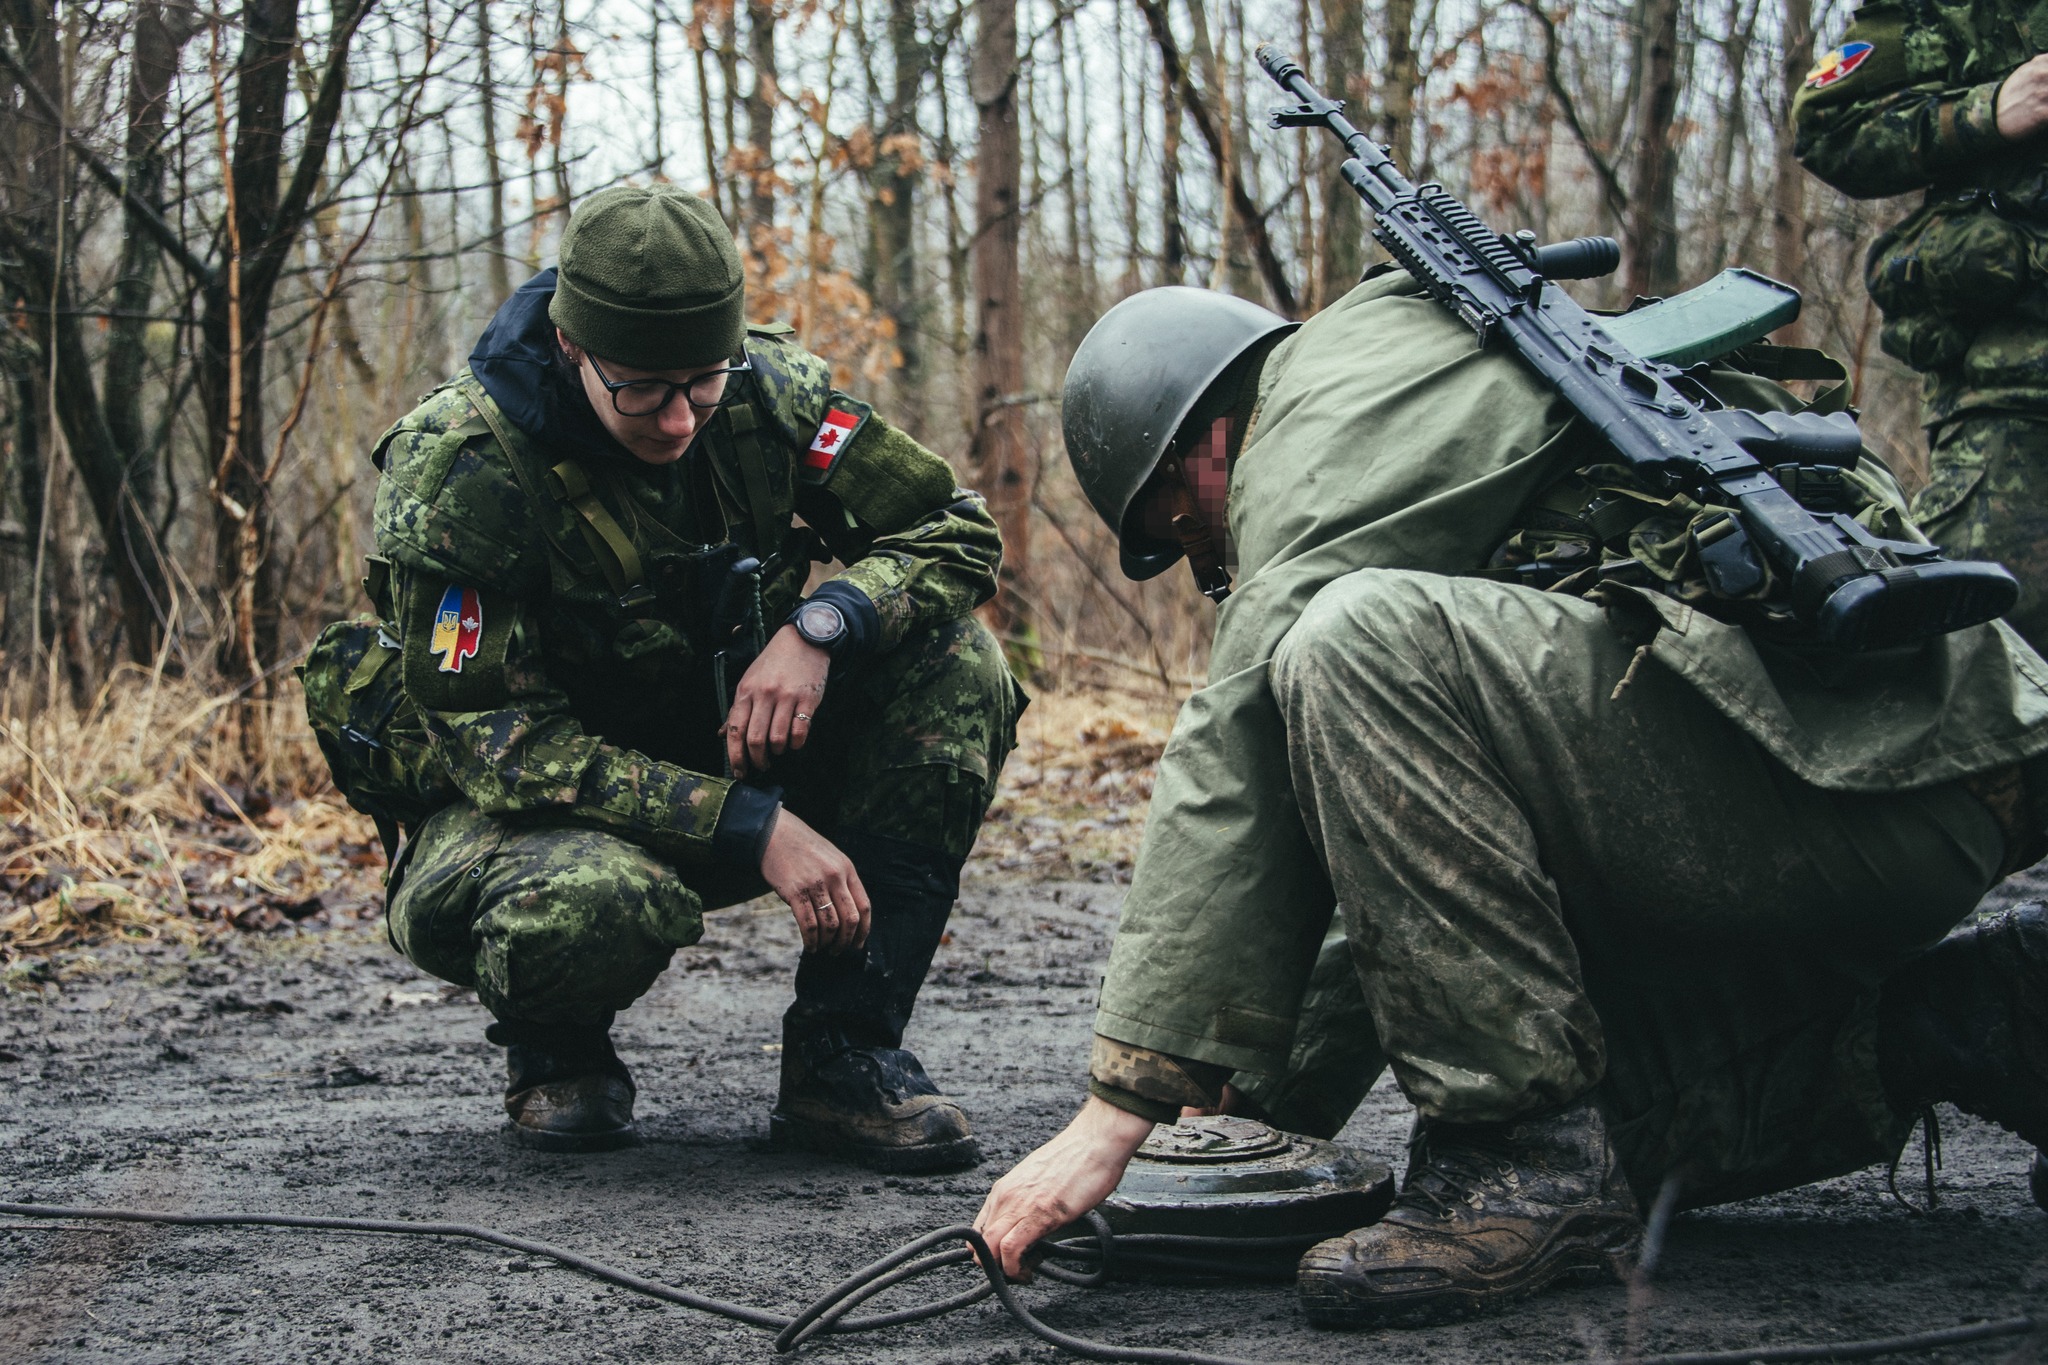 In the Canadian Armed Forces, they demonstrated how they train Ukrainian defenders in mine safety